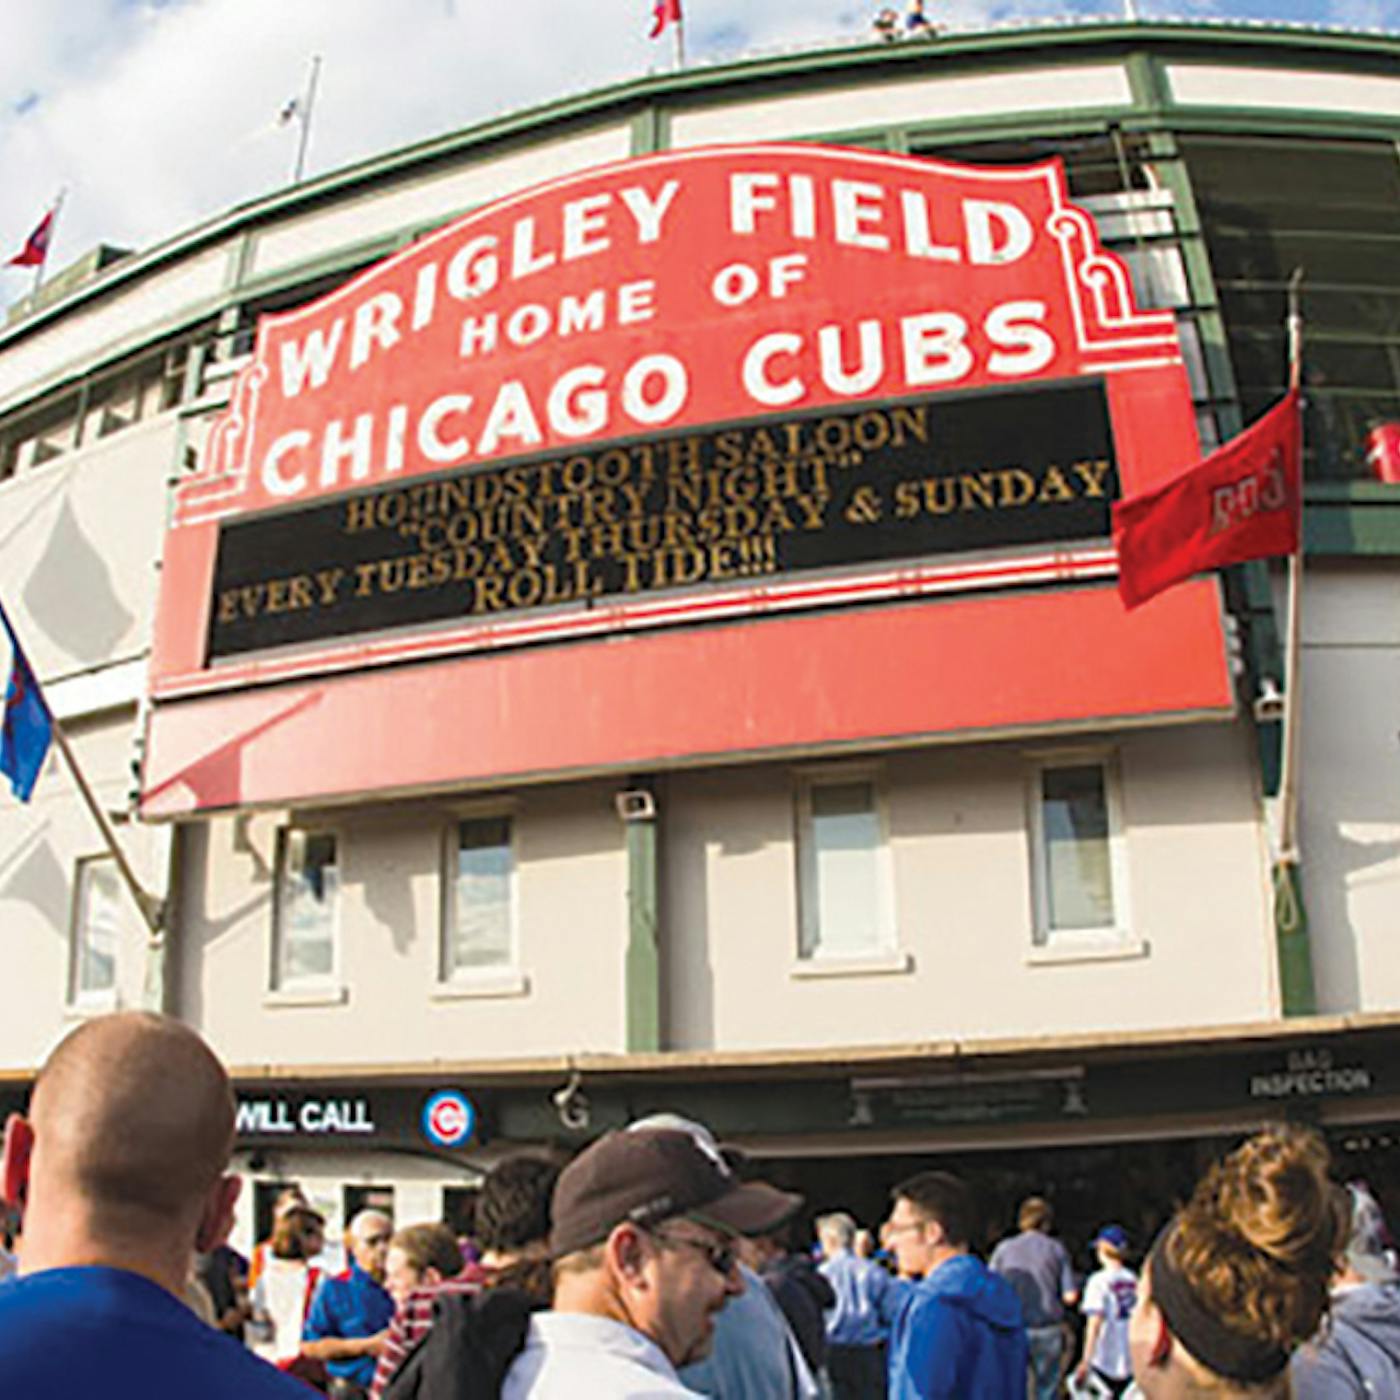 Baseball Fans at Wrigley Field in Chicago, Illinois (photo courtesy of choosechicago.com))